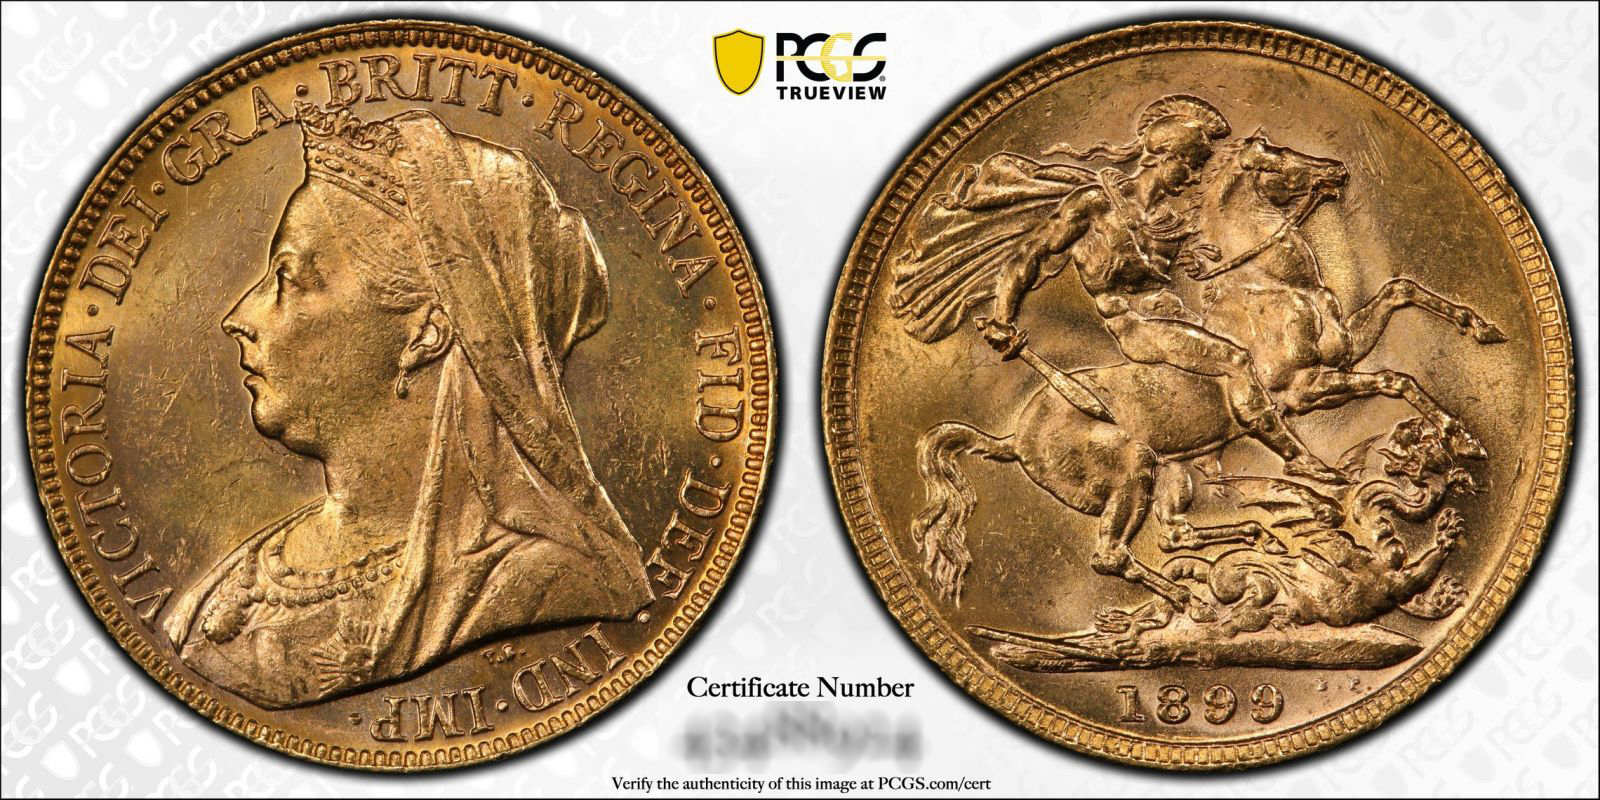 An 1899 Perth Mint gold sovereign coin showing Victoria facing left and St George and the Dragon on the reverse